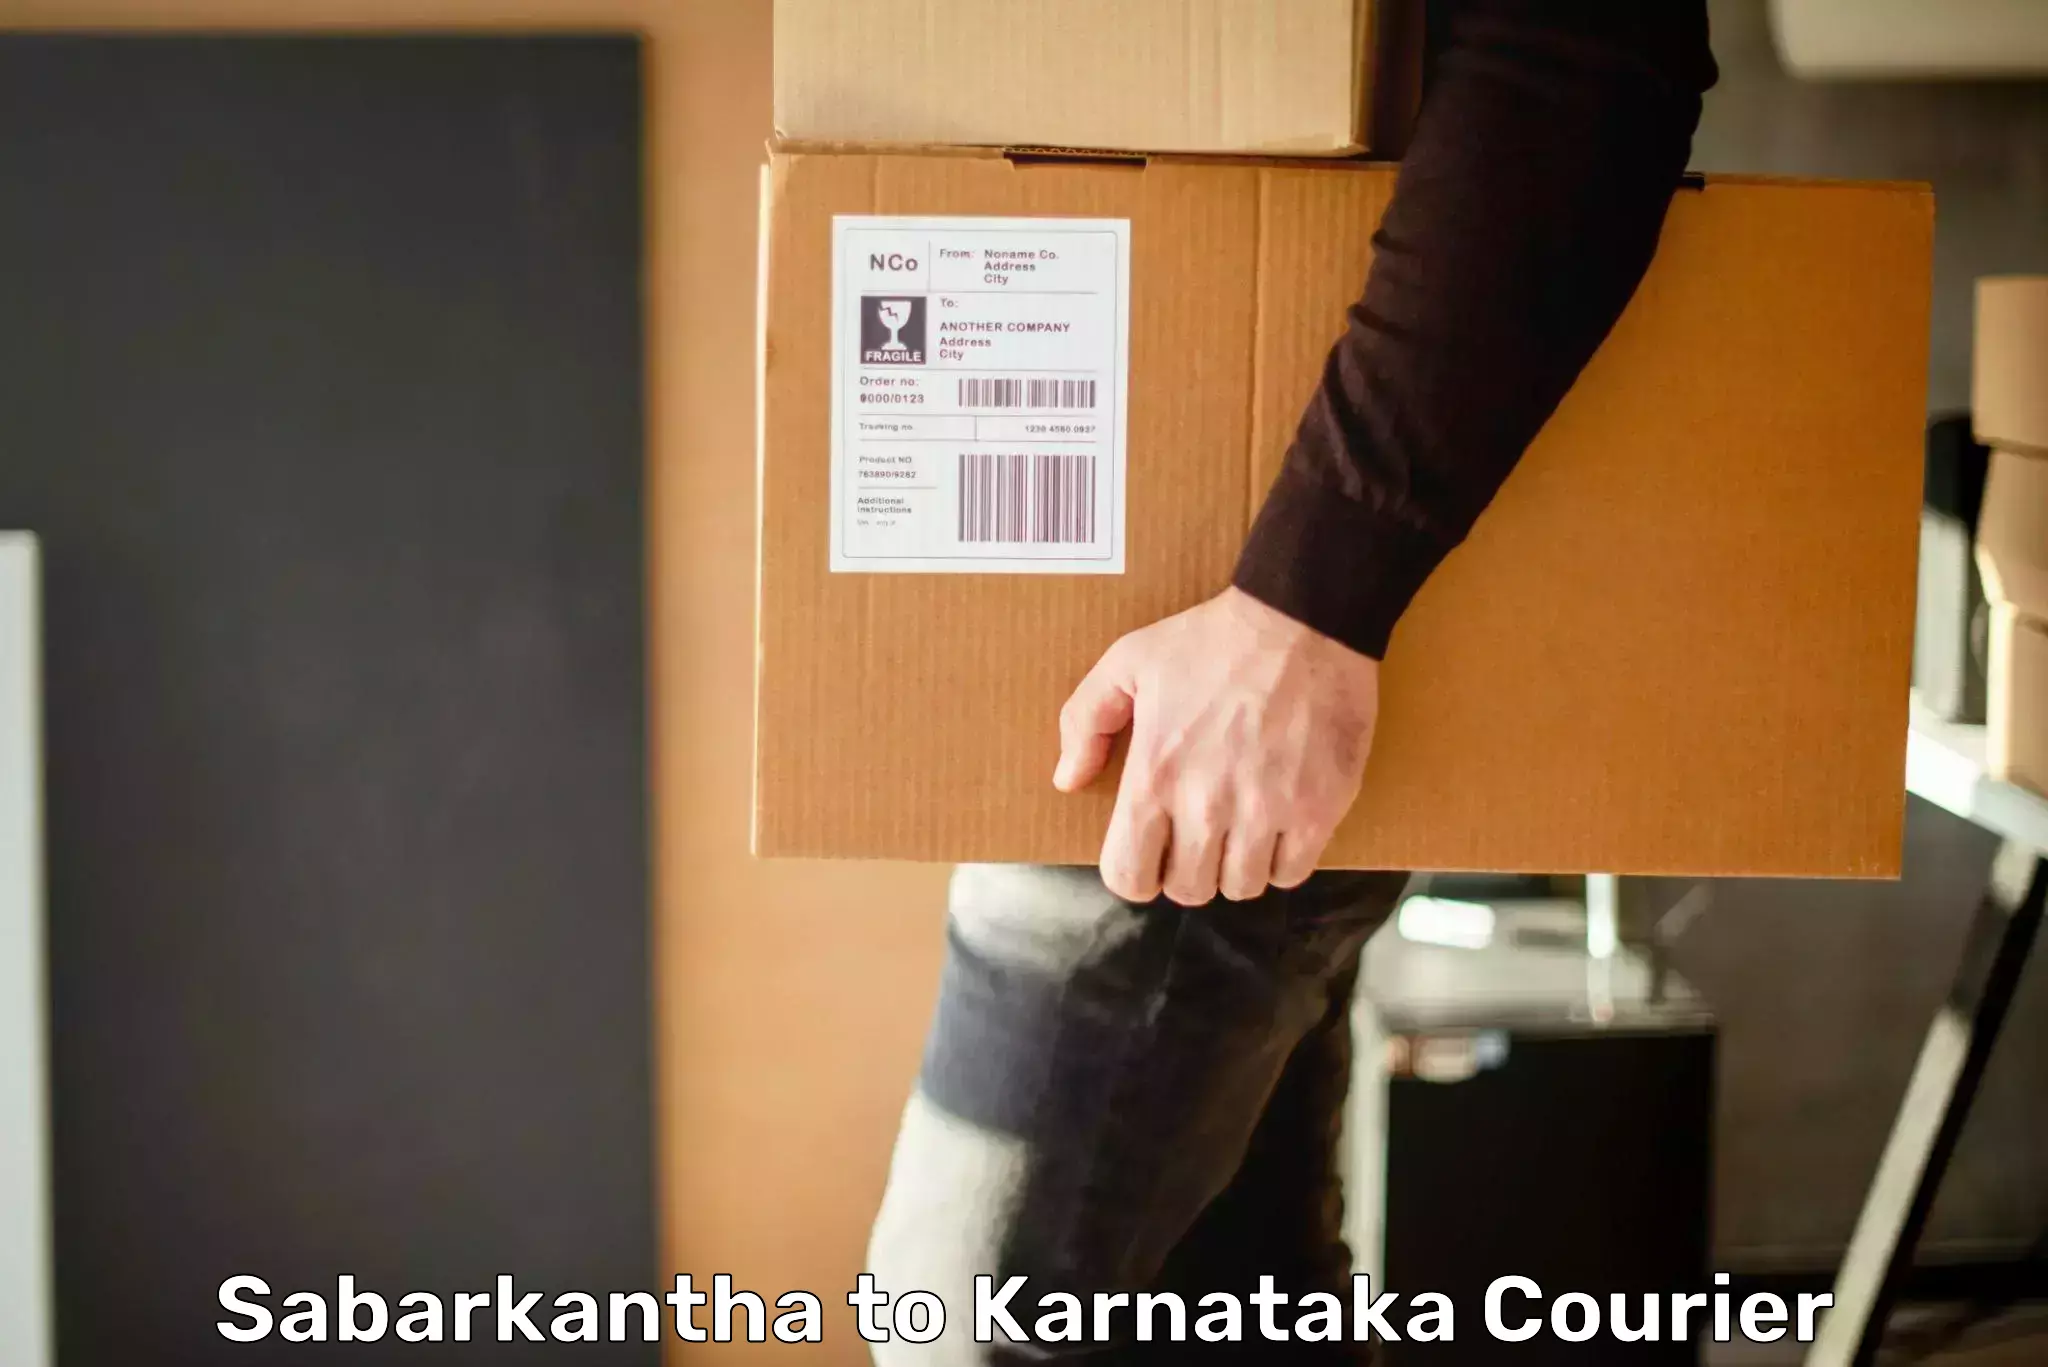 State-of-the-art courier technology Sabarkantha to Yellapur